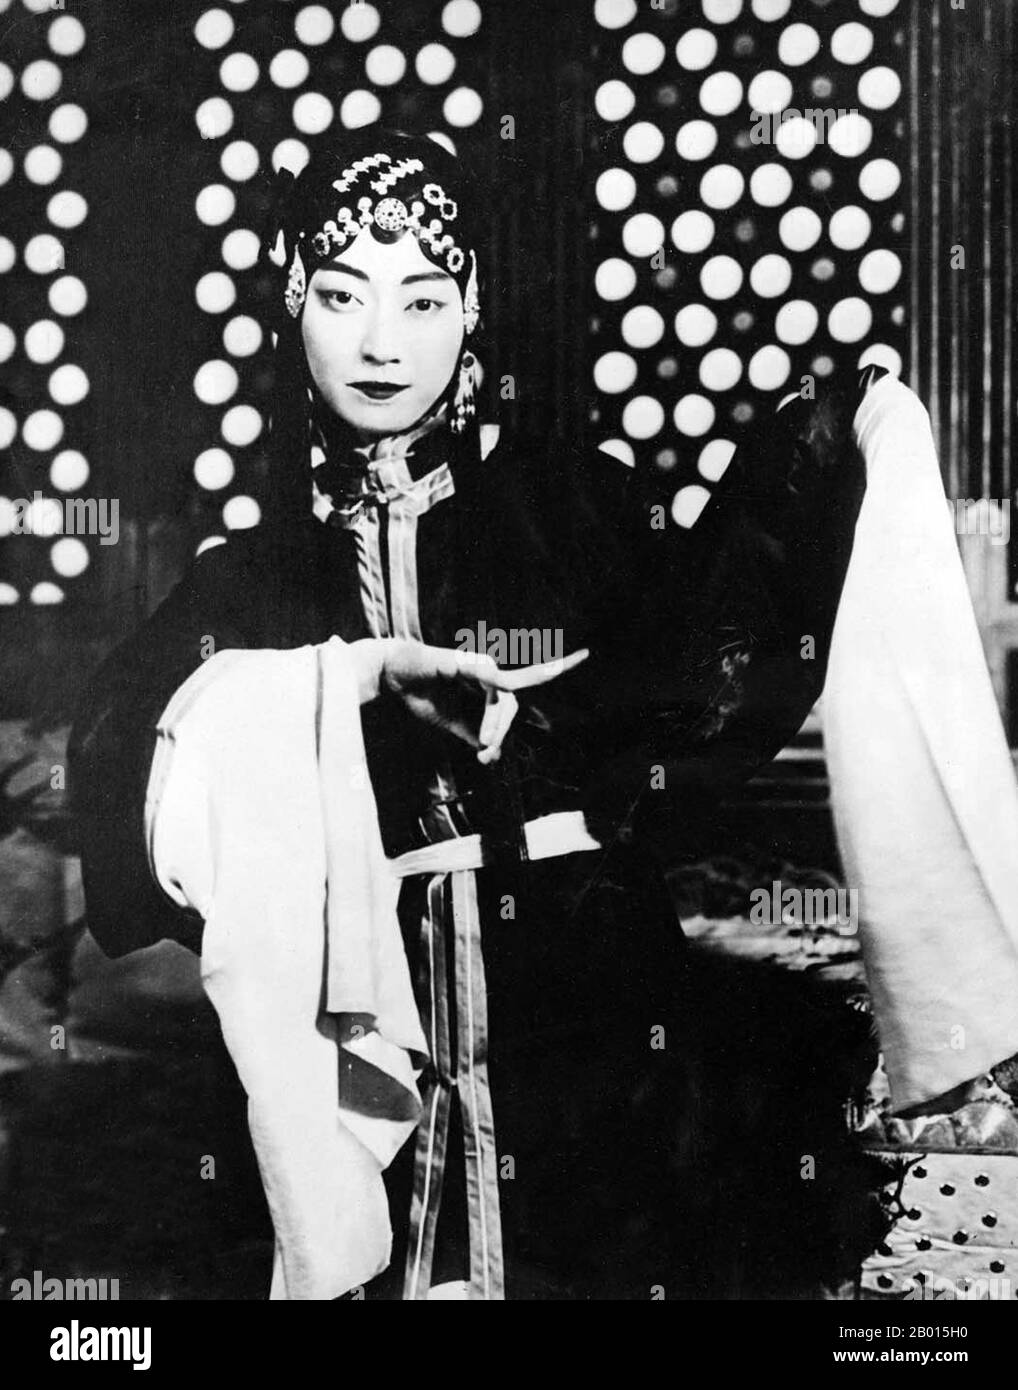 China: Mei Lanfang, famous Beijing (Peking) Opera artist (1894-1961), c. 1920-1929.  Mei Lan was born in Taizhou, Jiangsu, into a family of Beijing Opera and Kunqu performers. He made his stage debut at the Guanghe Theatre in 1904 when he was 10 years old.  In his 50-year stage career, he maintained strong continuity while always working on new techniques. His most famous roles were those of female characters; skillful portrayal of women won him international acclaim. He also played an important part in continuing the performance tradition of Kunqu. Stock Photo